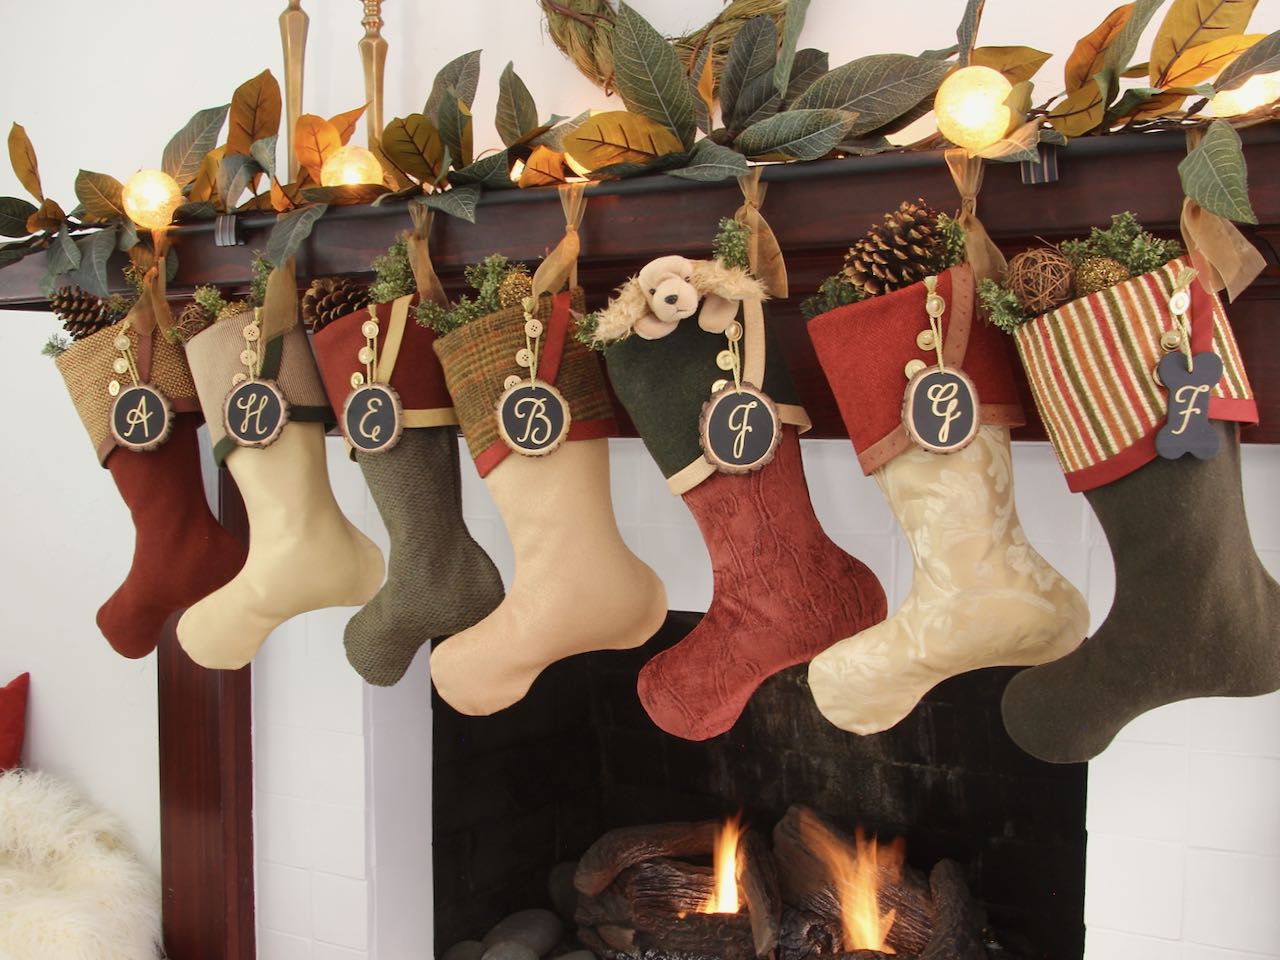 7 coordinating yet unique Christmas stockings are hagning from a mantel above a fire. Tree slice name tags hang from the top of three buttons on each cuff